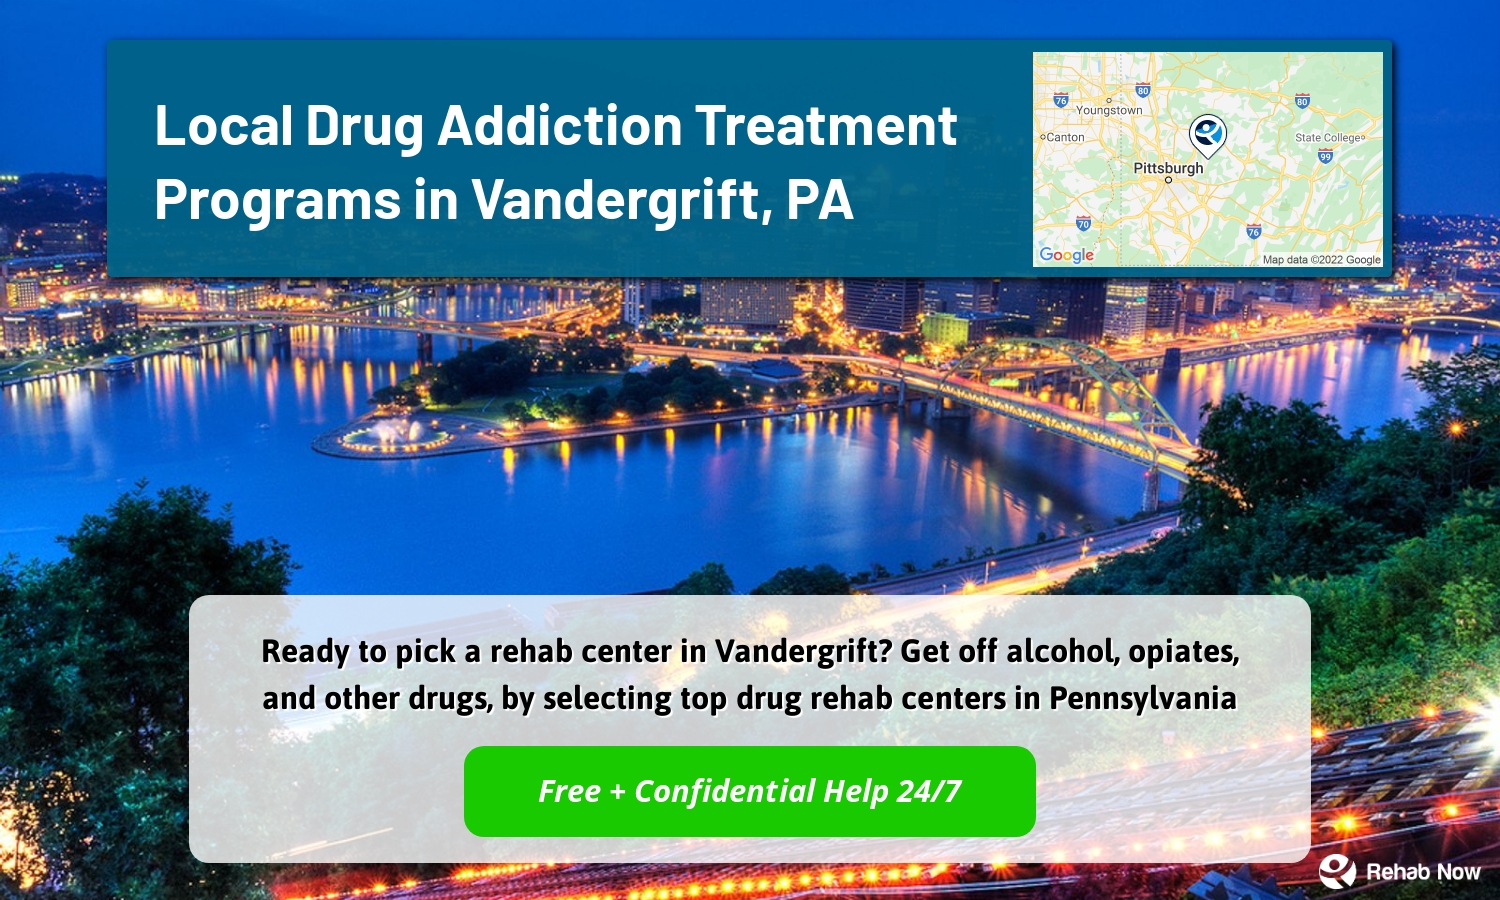 Ready to pick a rehab center in Vandergrift? Get off alcohol, opiates, and other drugs, by selecting top drug rehab centers in Pennsylvania